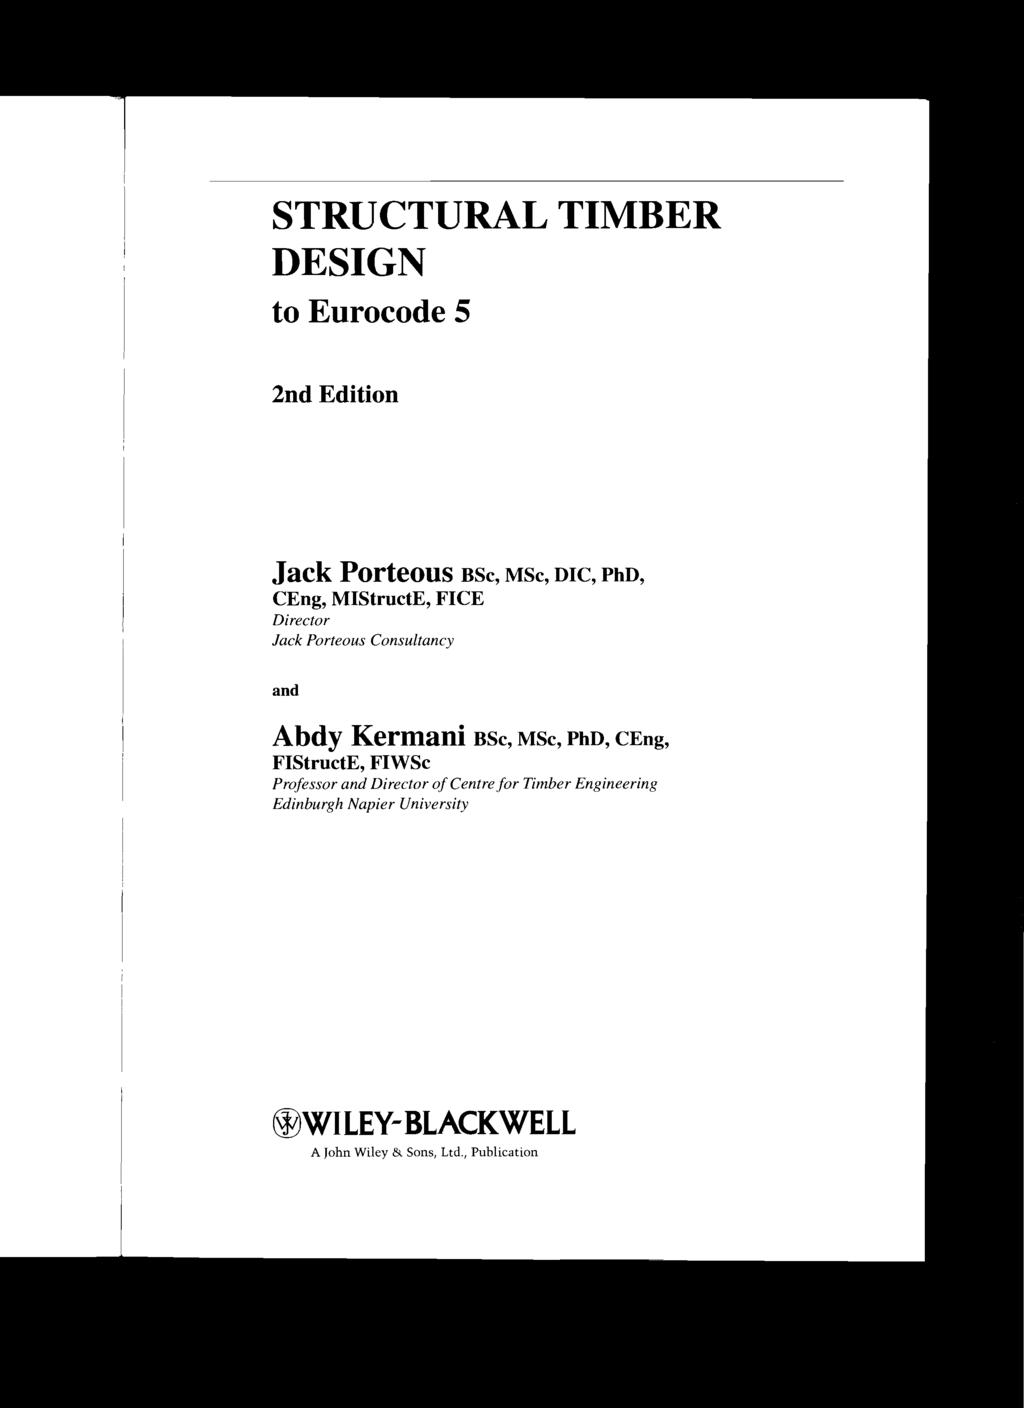 STRUCTURAL TIMBER DESIGN to Eurocode 5 2nd Edition Jack Porteous BSc, MSc, DIC, PhD, CEng, MIStructE, FICE Director lack Porteous Consultancy and Abdy Kernlani BSc,